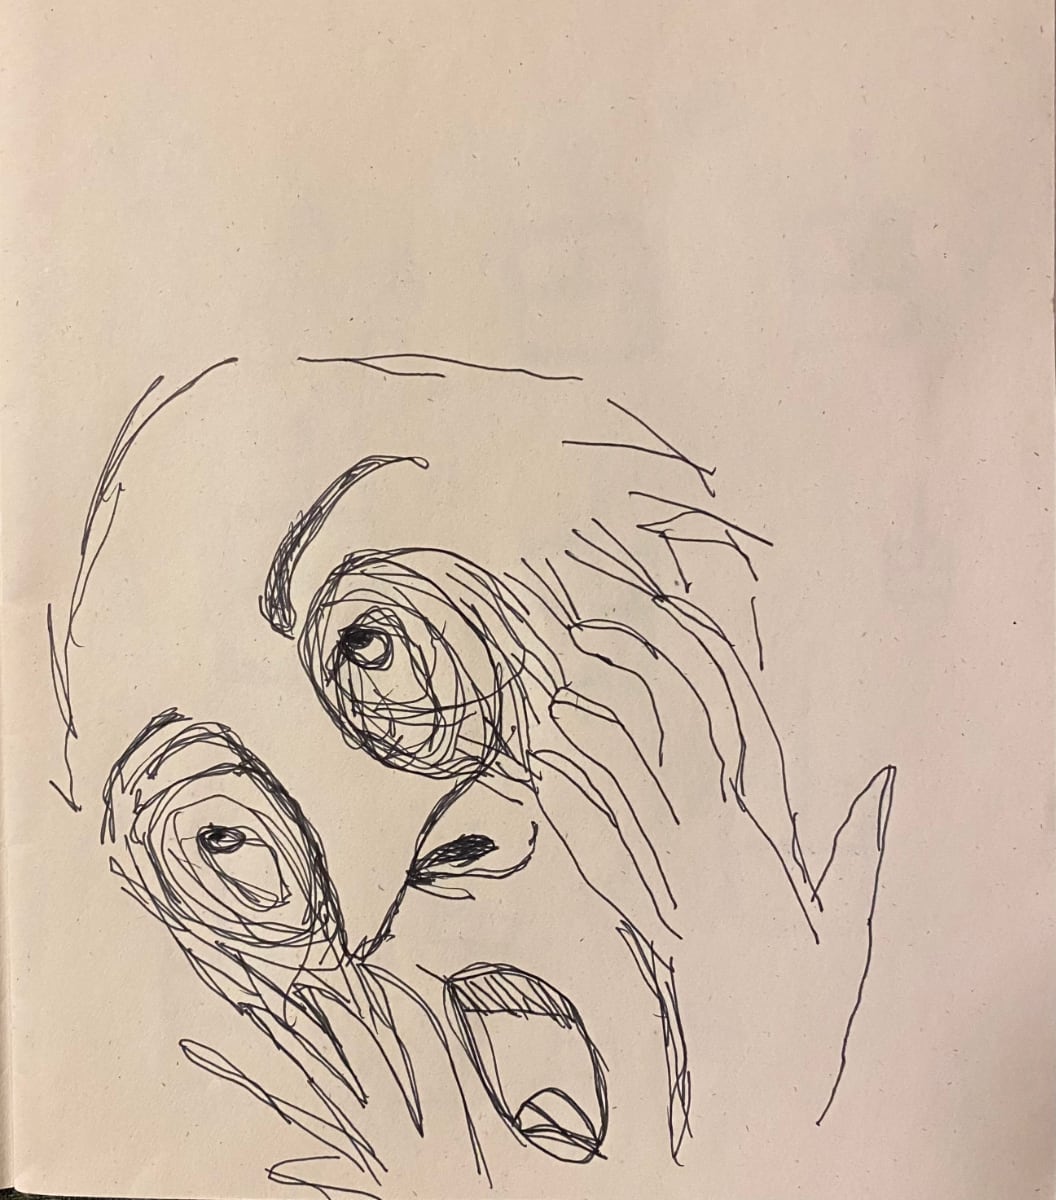 The image is a rough pen sketch, with black ink, of a the head of a person holding their hands up to their face, with wide, sunken, and terrified eyes and open mouth, in a manner similar to the painting, “The Scream,” by Edvard Munch. The sketch is rough, choatic, and disjointed. It is drawn on a sheet of brownish sketchpad paper.